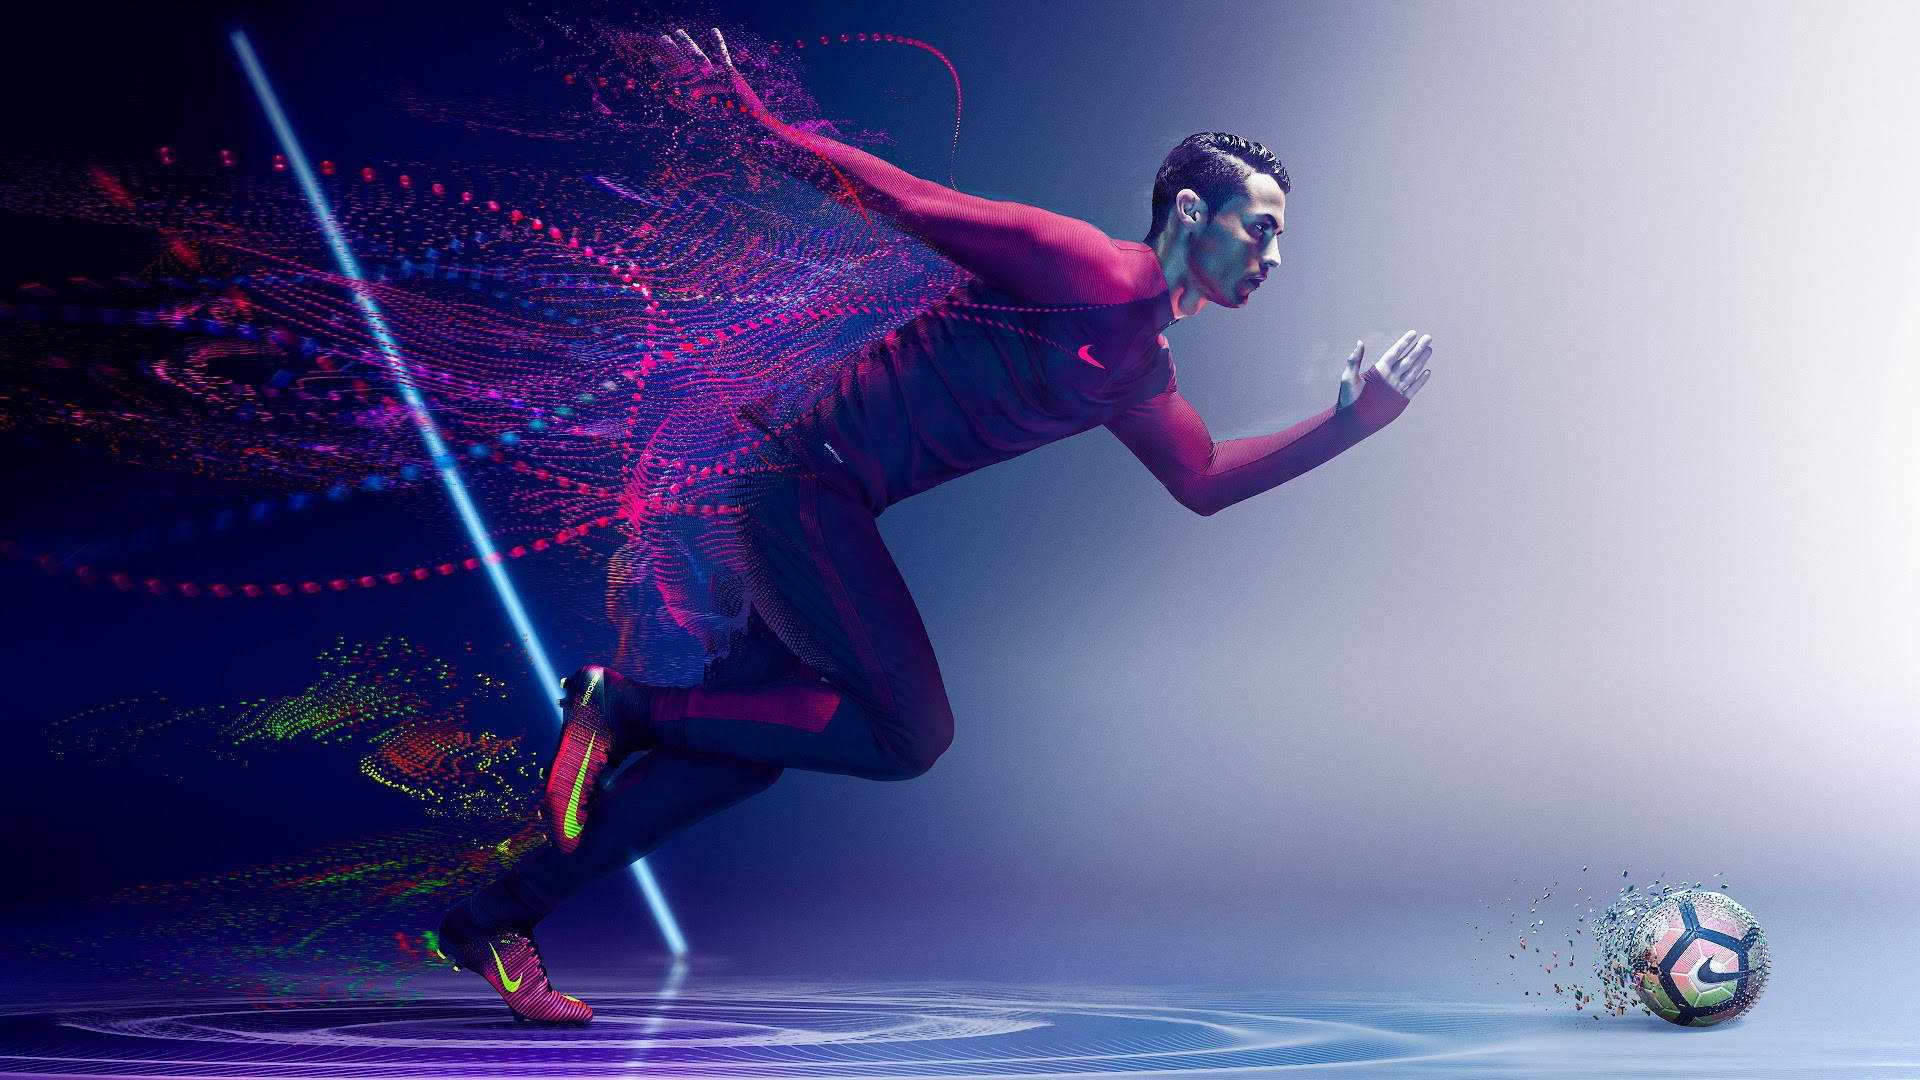 Cristiano Ronaldo In Action With An Abstract Backdrop